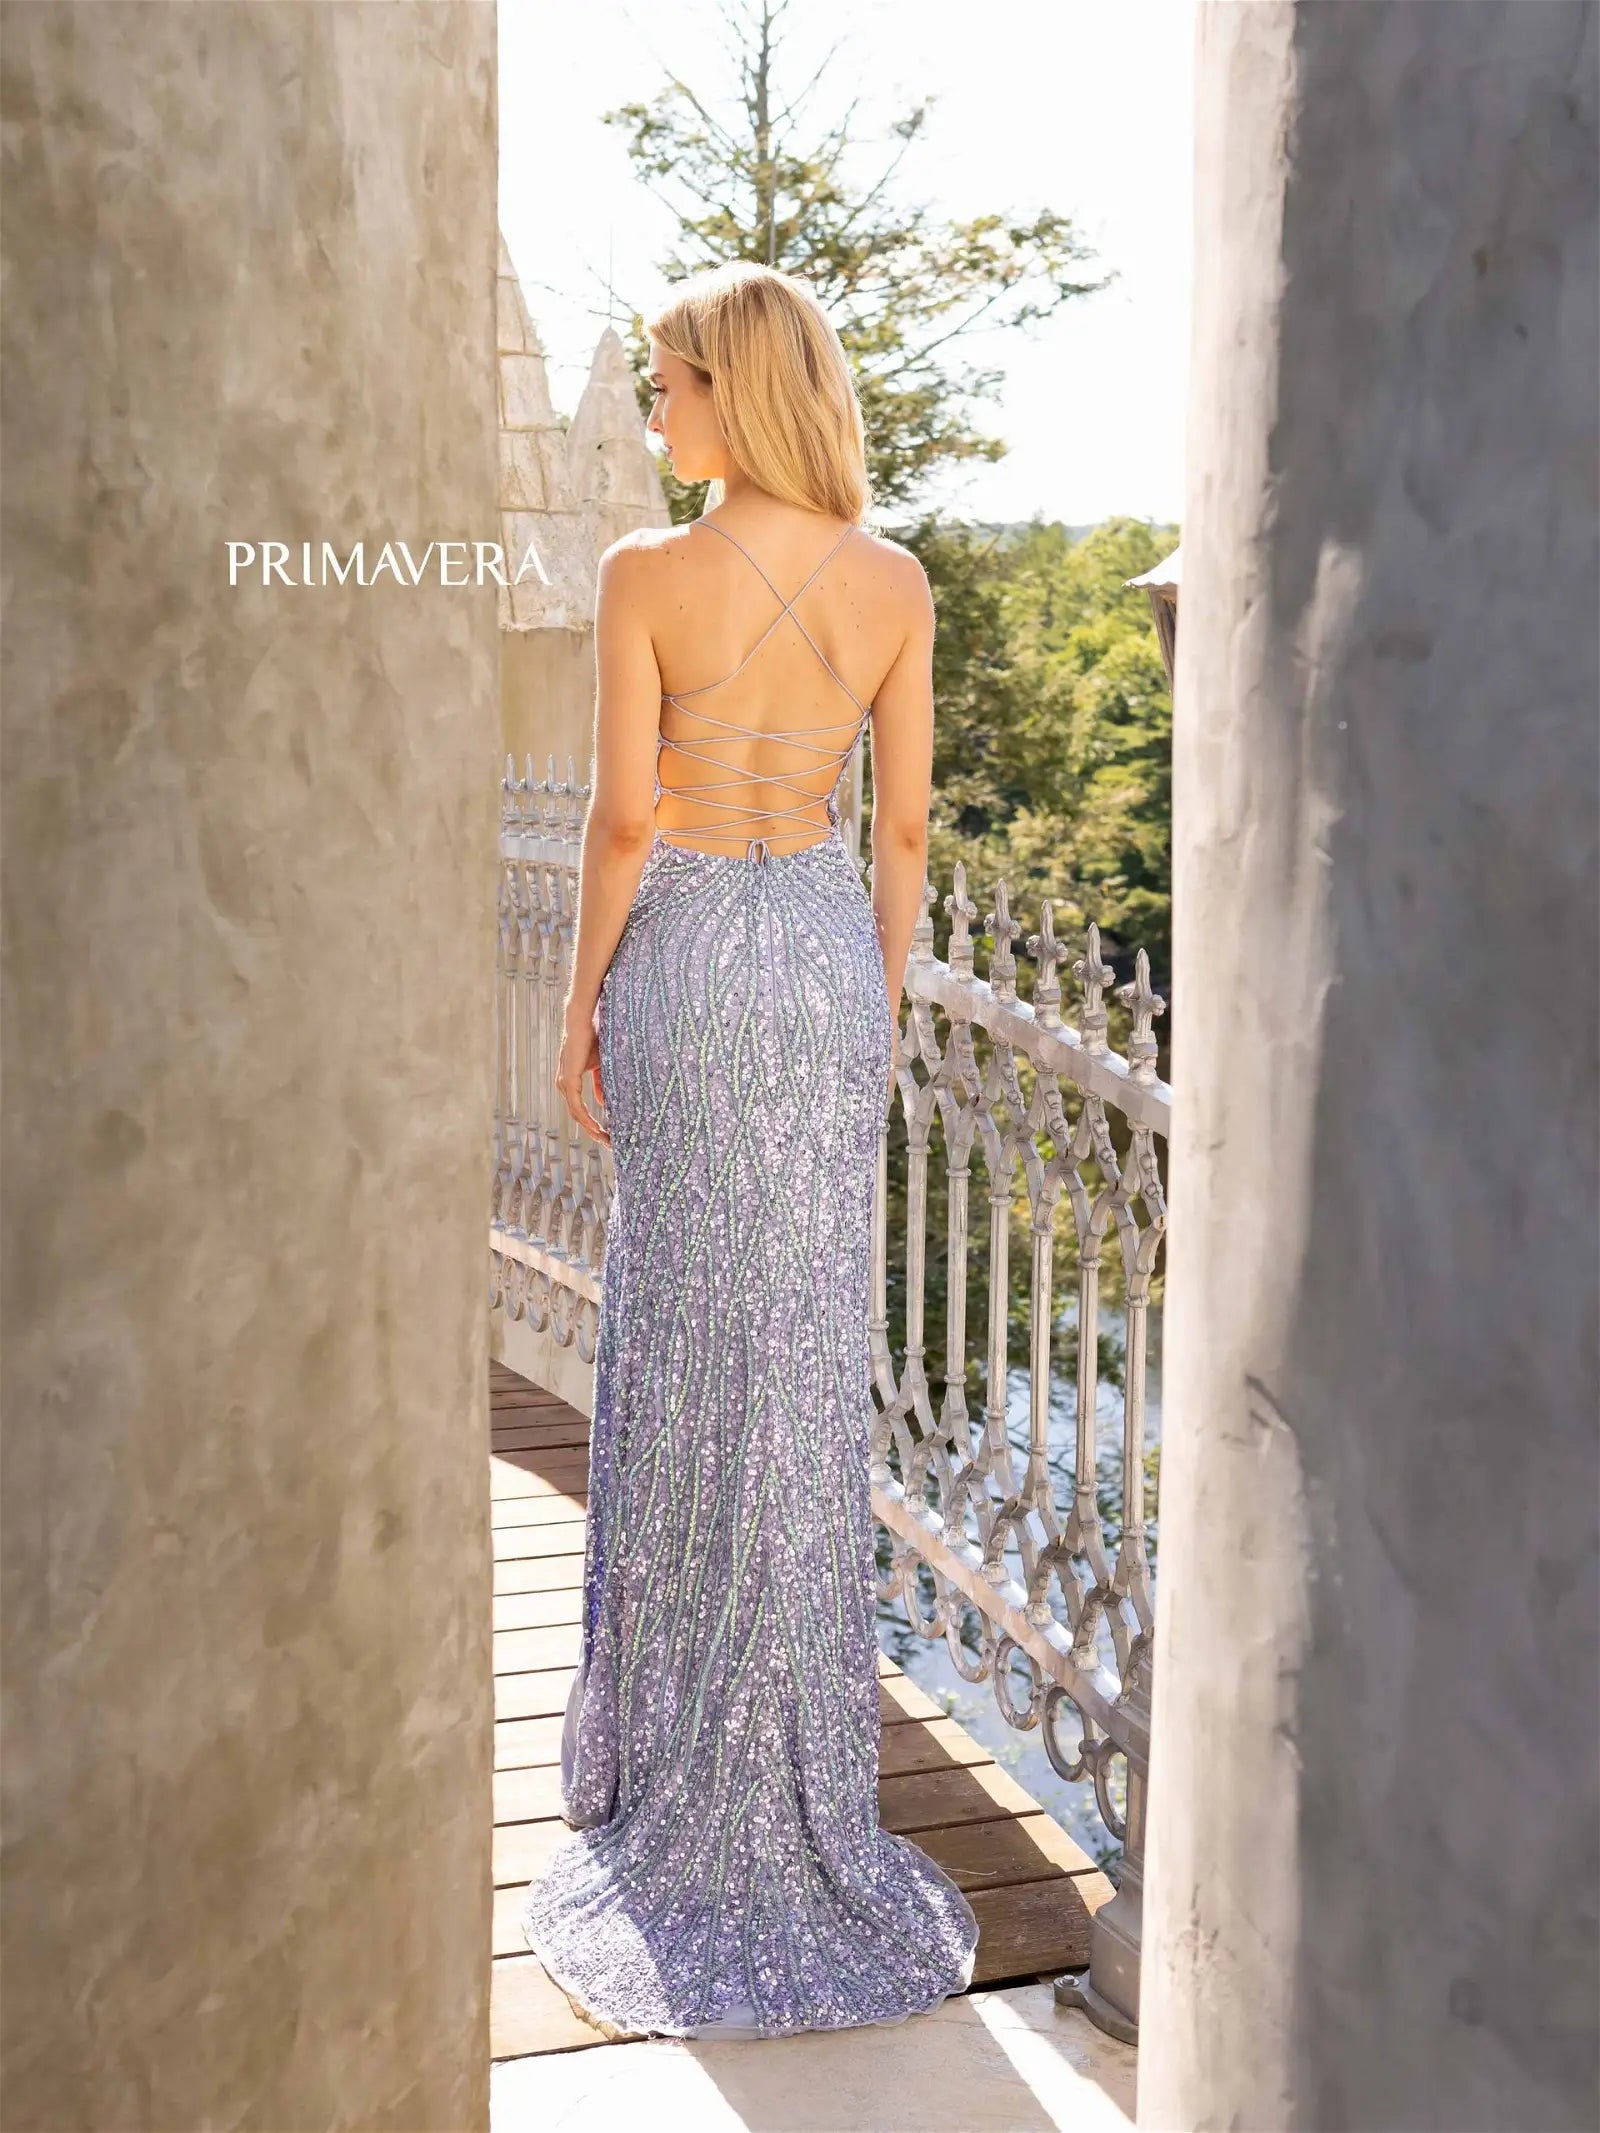 Primavera Couture 3959 Prom Dress Long Beaded Gown. This Gown has a beautiful design all over. Primavera Couture 3959 Sequin Scoop neck Prom Dress Backless Corset Slit Formal Gown  Size-000-18  Colors-Lilac, Coral